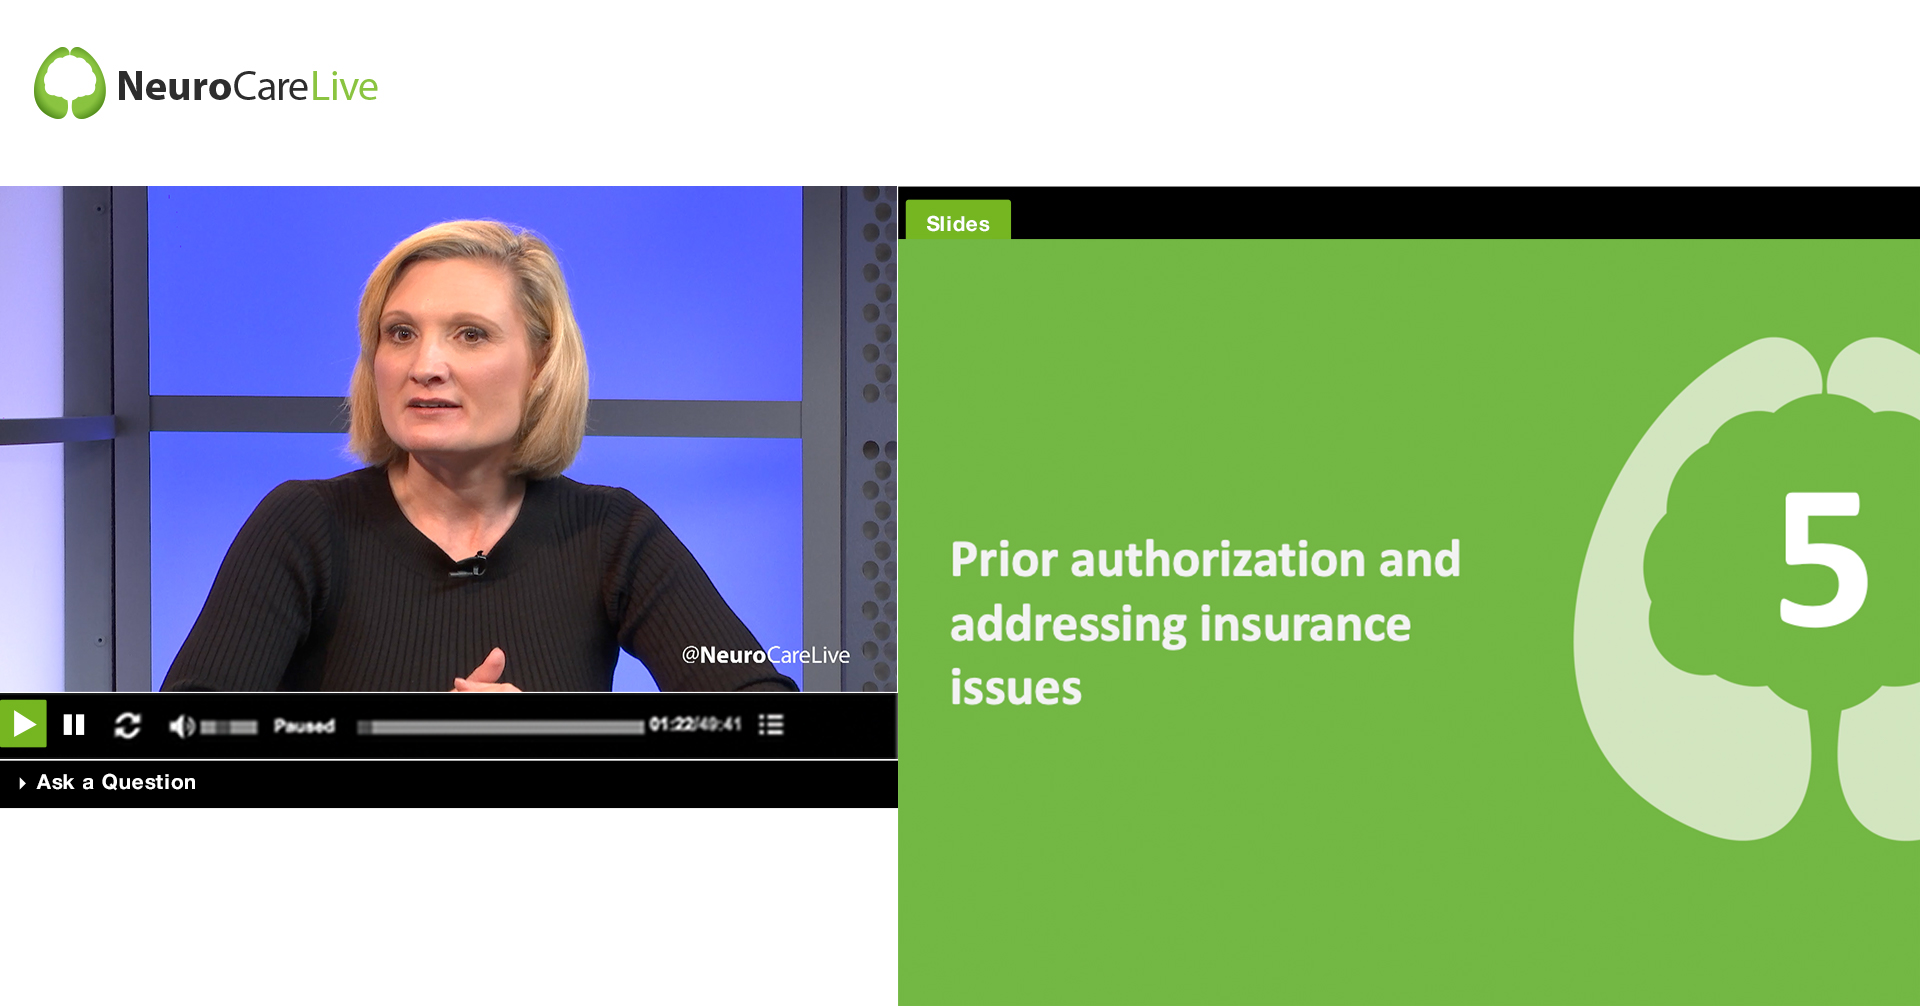 Chapter 5: Prior authorization and addressing insurance issues